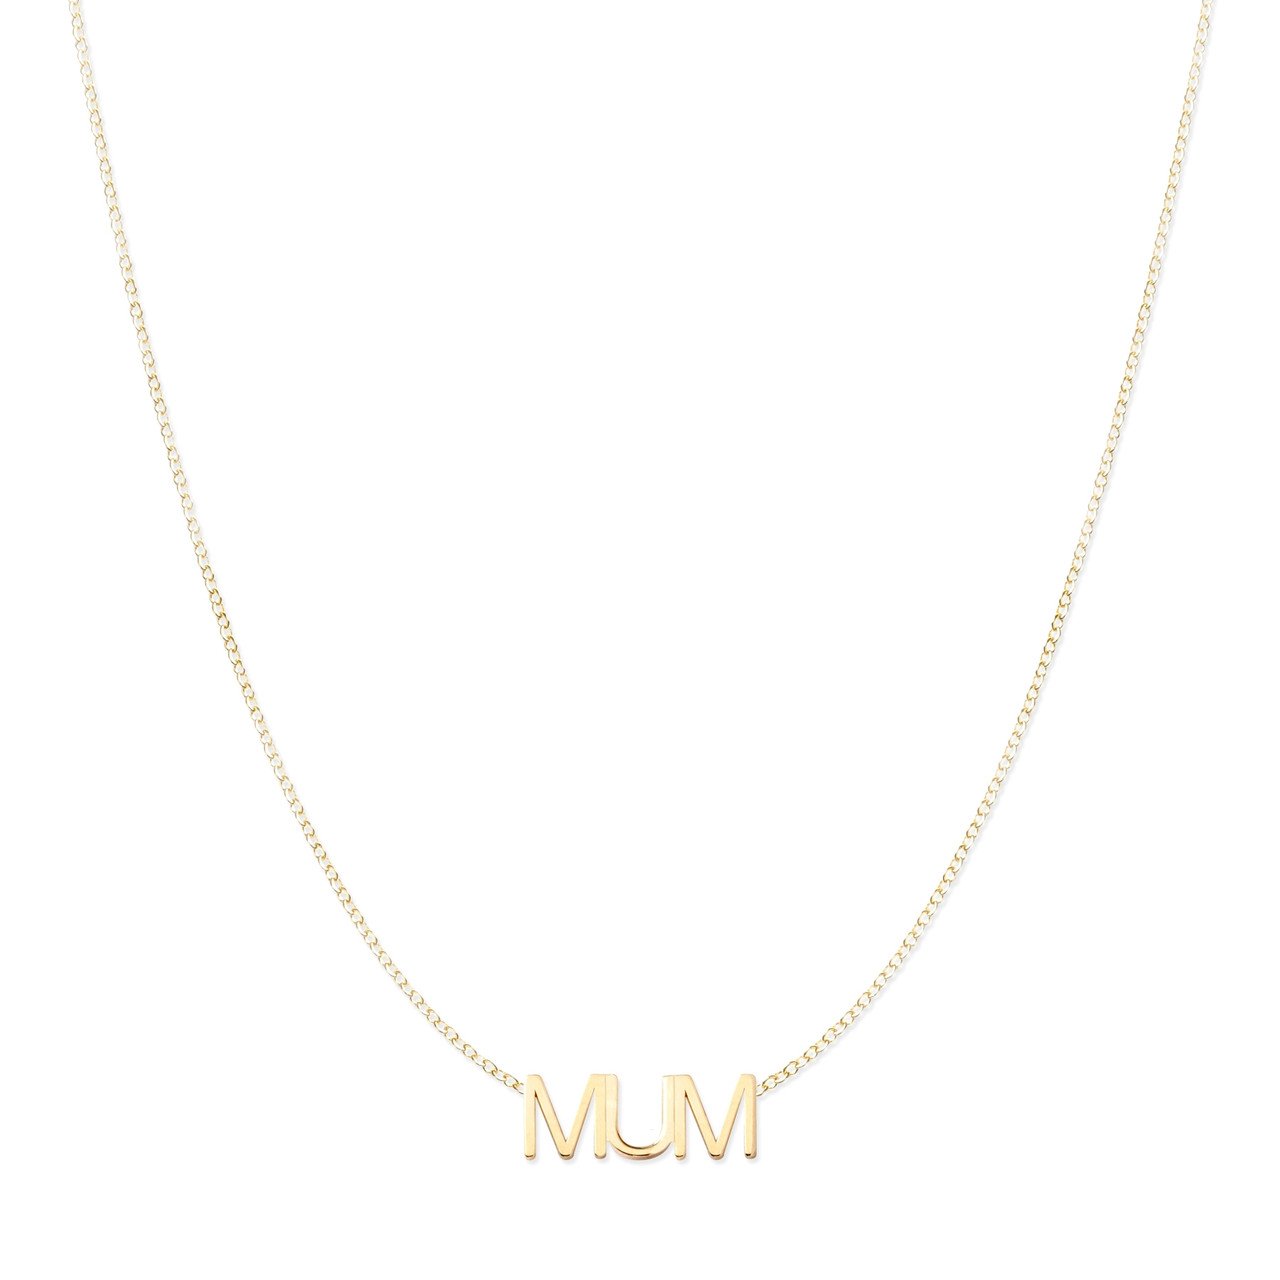 Custom Mom Kids Name Necklace Silver Rose Gold Engraved Heart Family Jewelry  USA | eBay